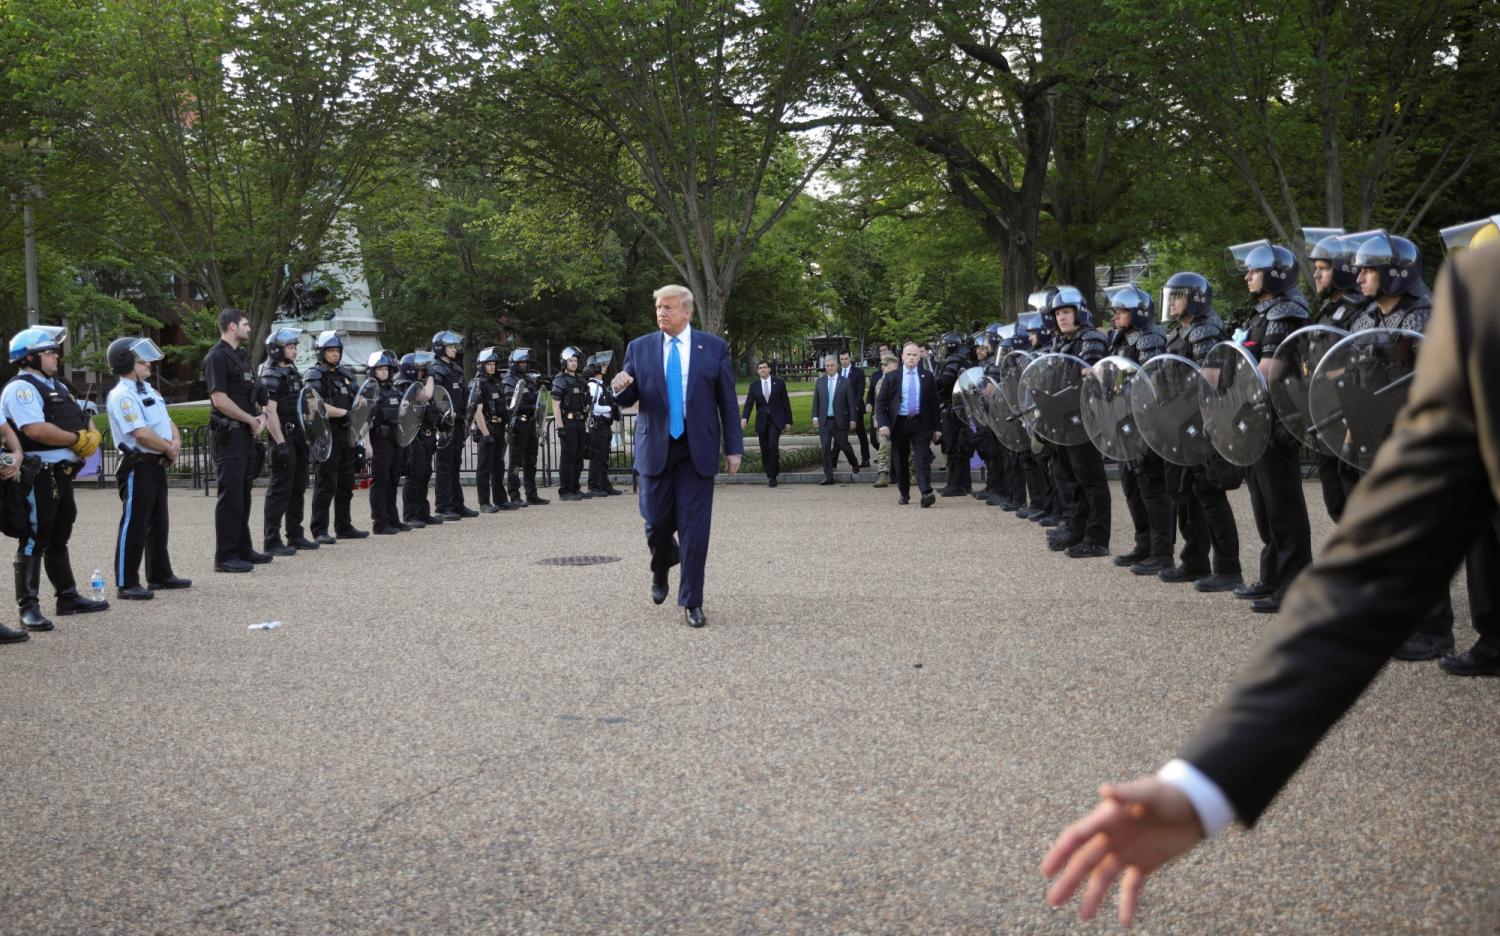 Donald Trump walks through Lafeyette Square flanked by police